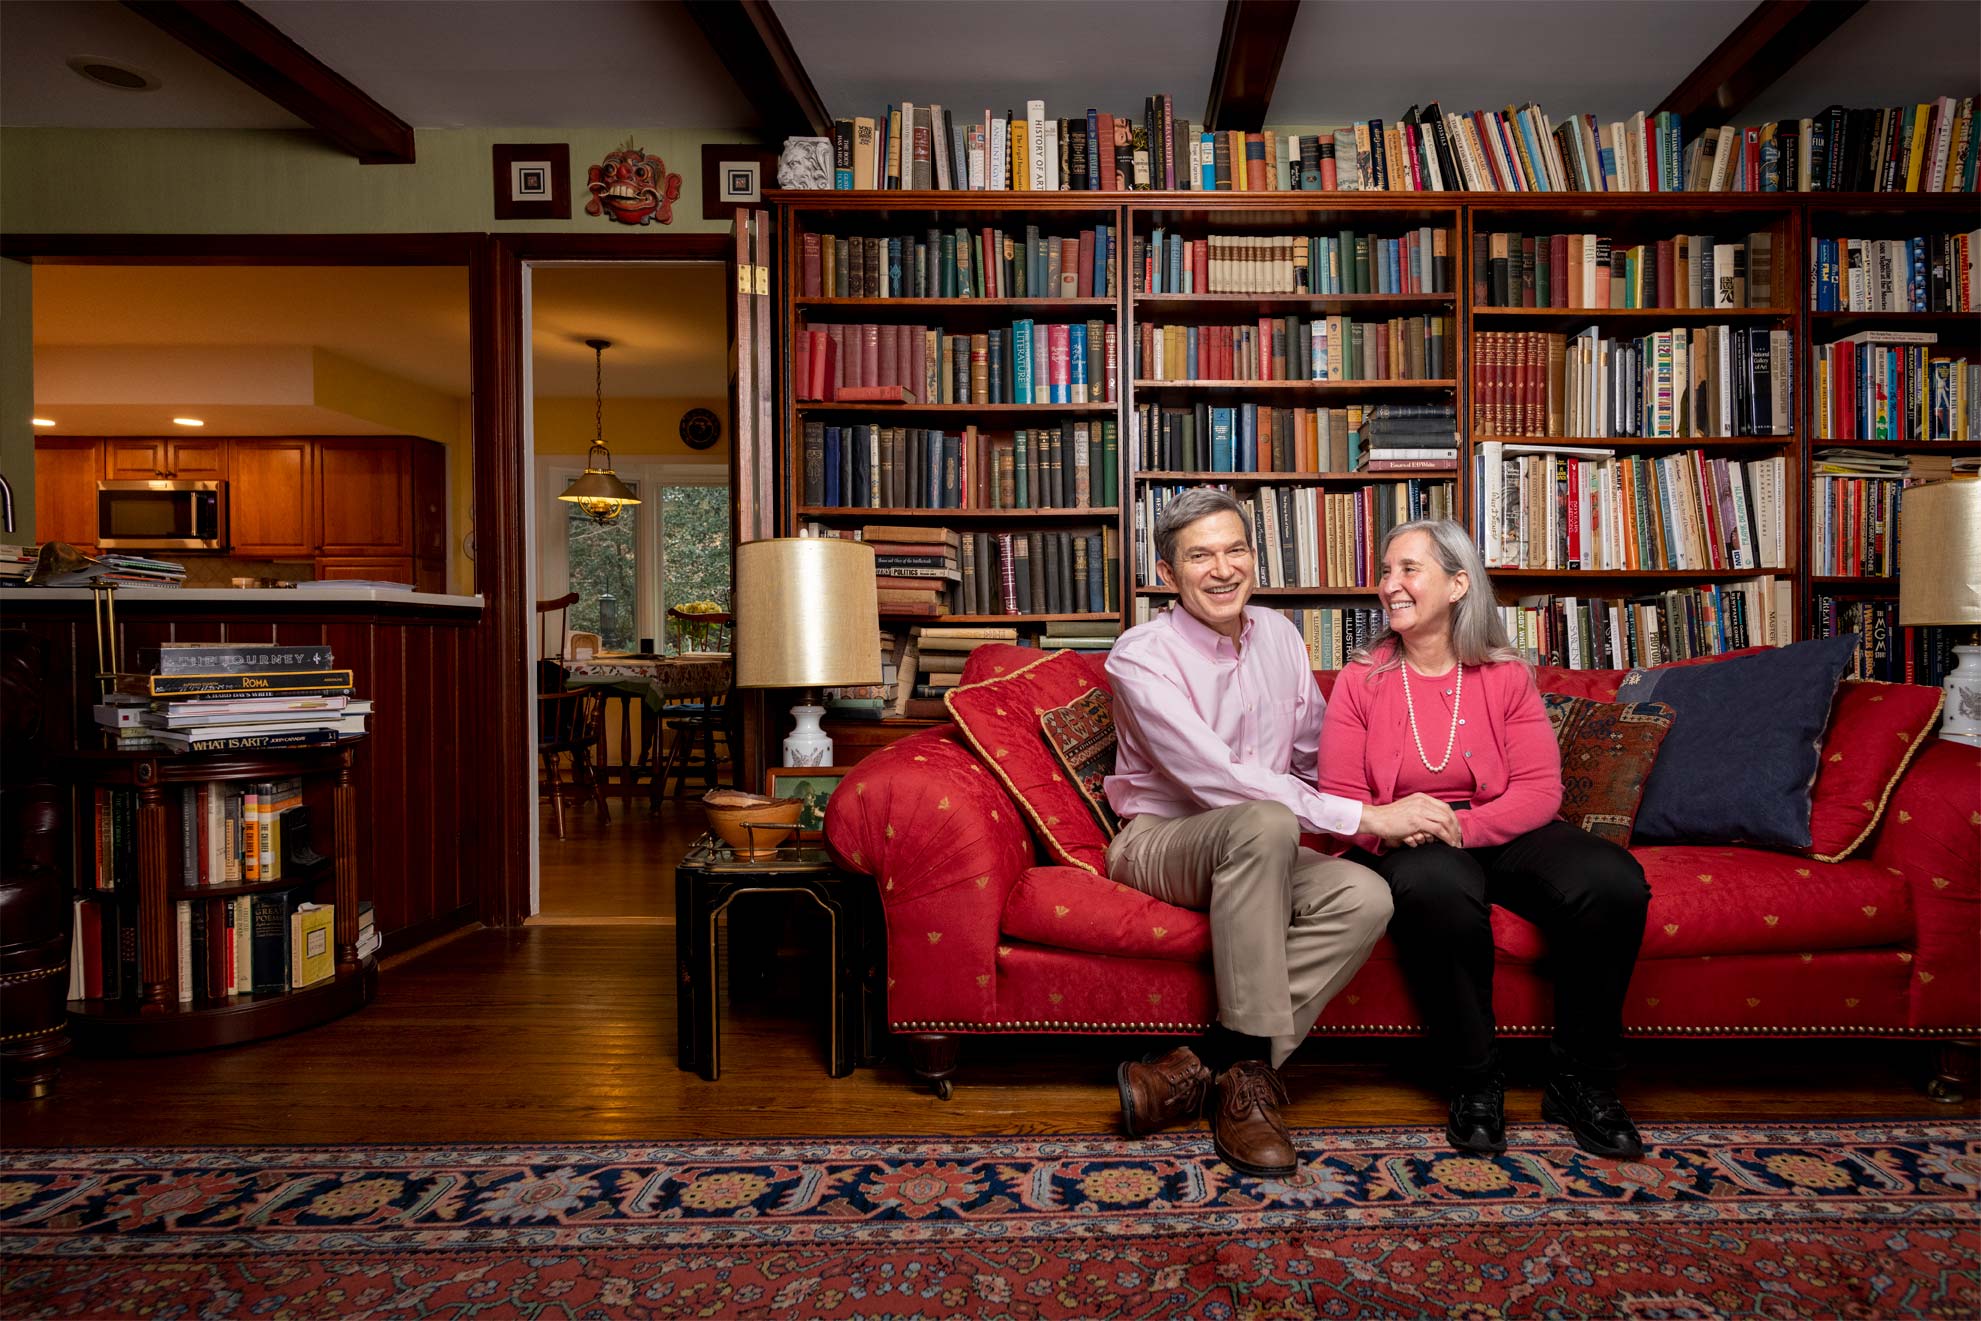 A couple smiling and laughing on a sofa in front of bookshelves